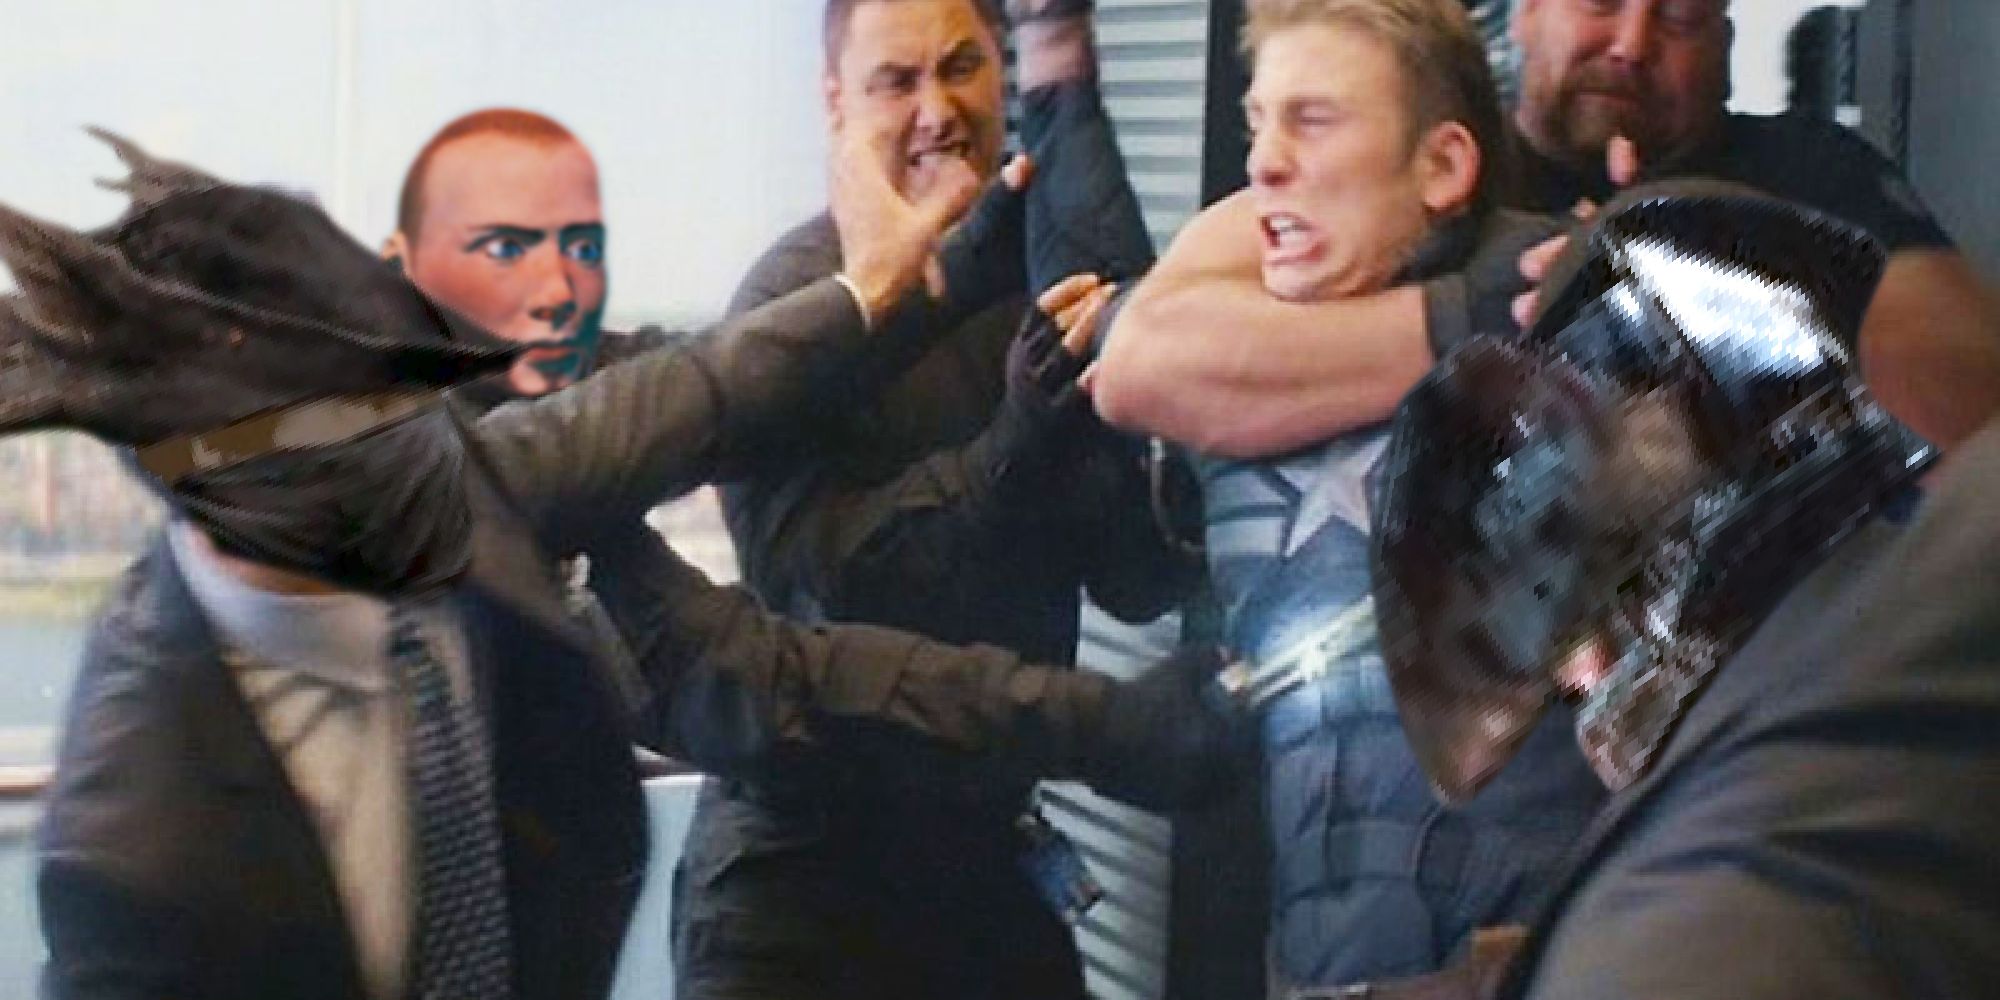 Captain America in the elevator scene from Winter Soldier fighting bad guys that include a Bloodborne hunter and the guy in the pot from Getting Over It with Bennett Foddy